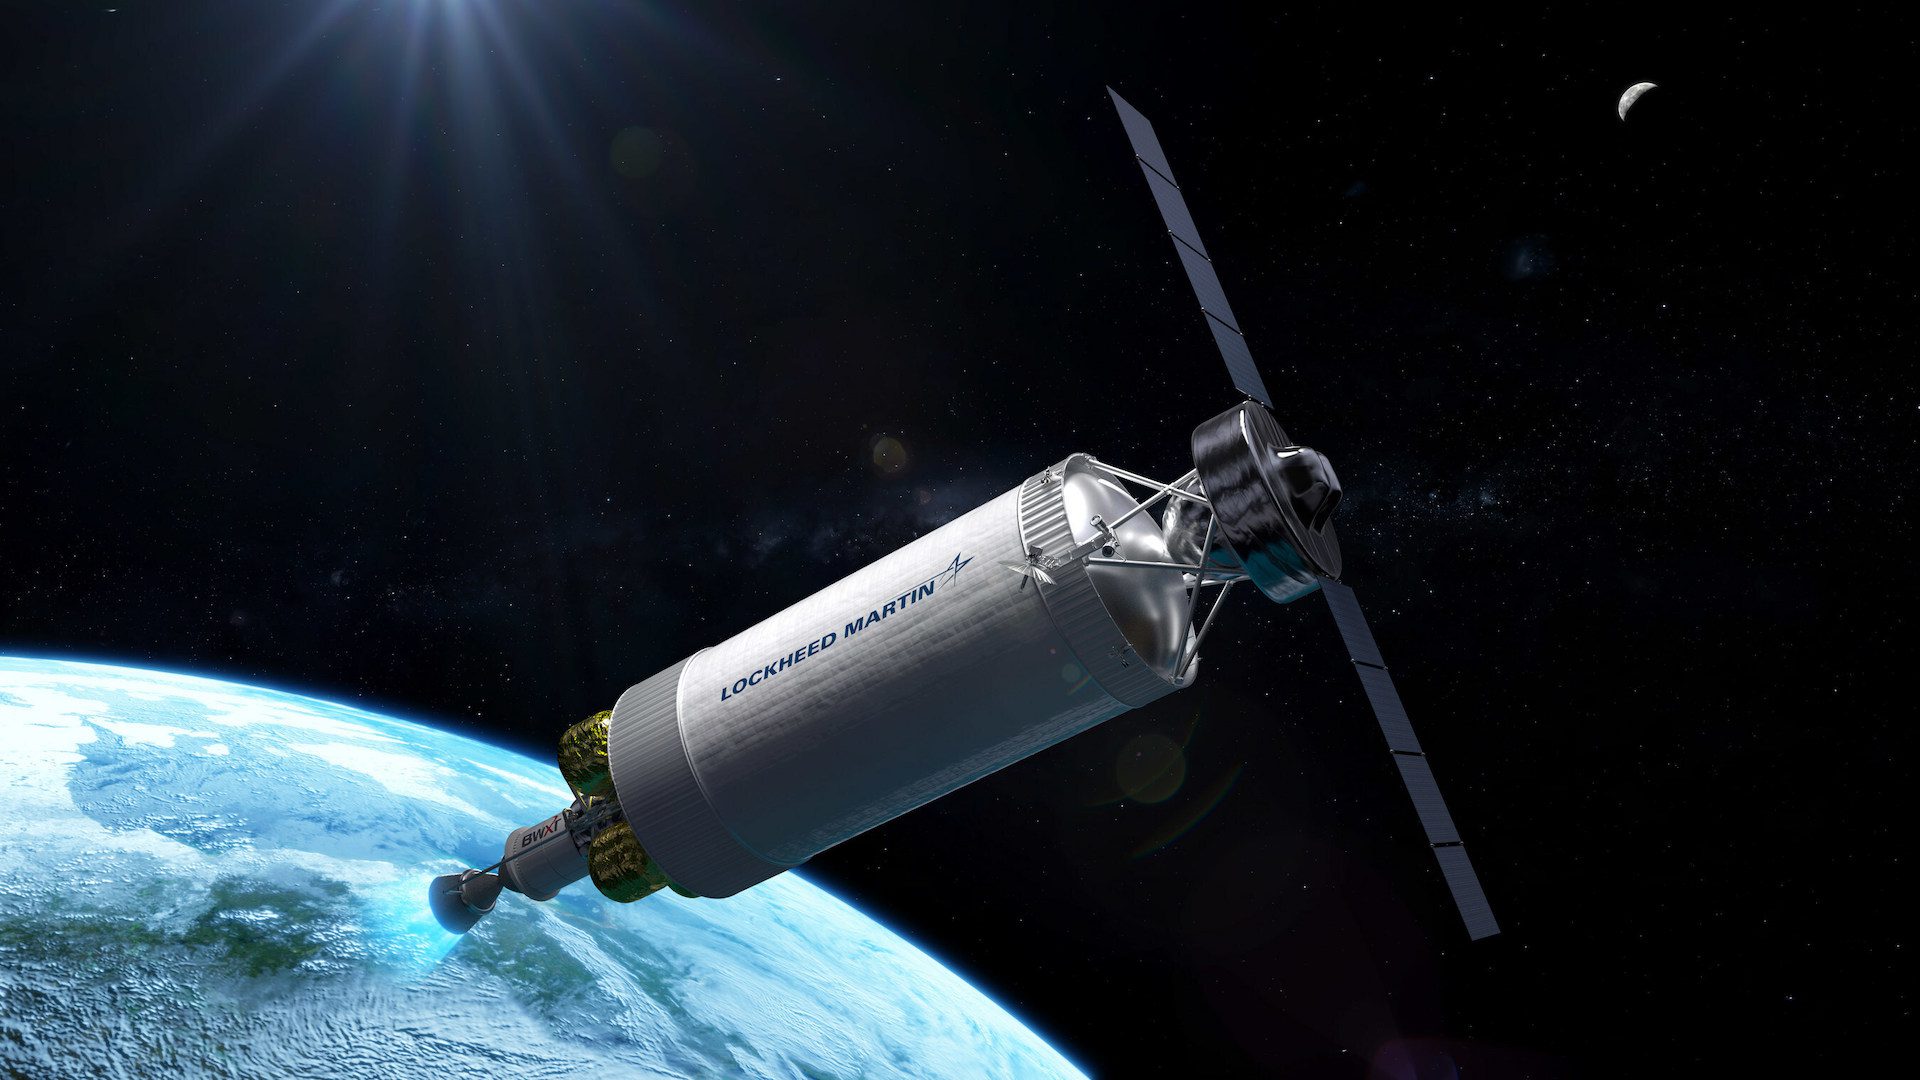 Artist concept of Demonstration for Rocket to Agile Cislunar Operations (DRACO) spacecraft